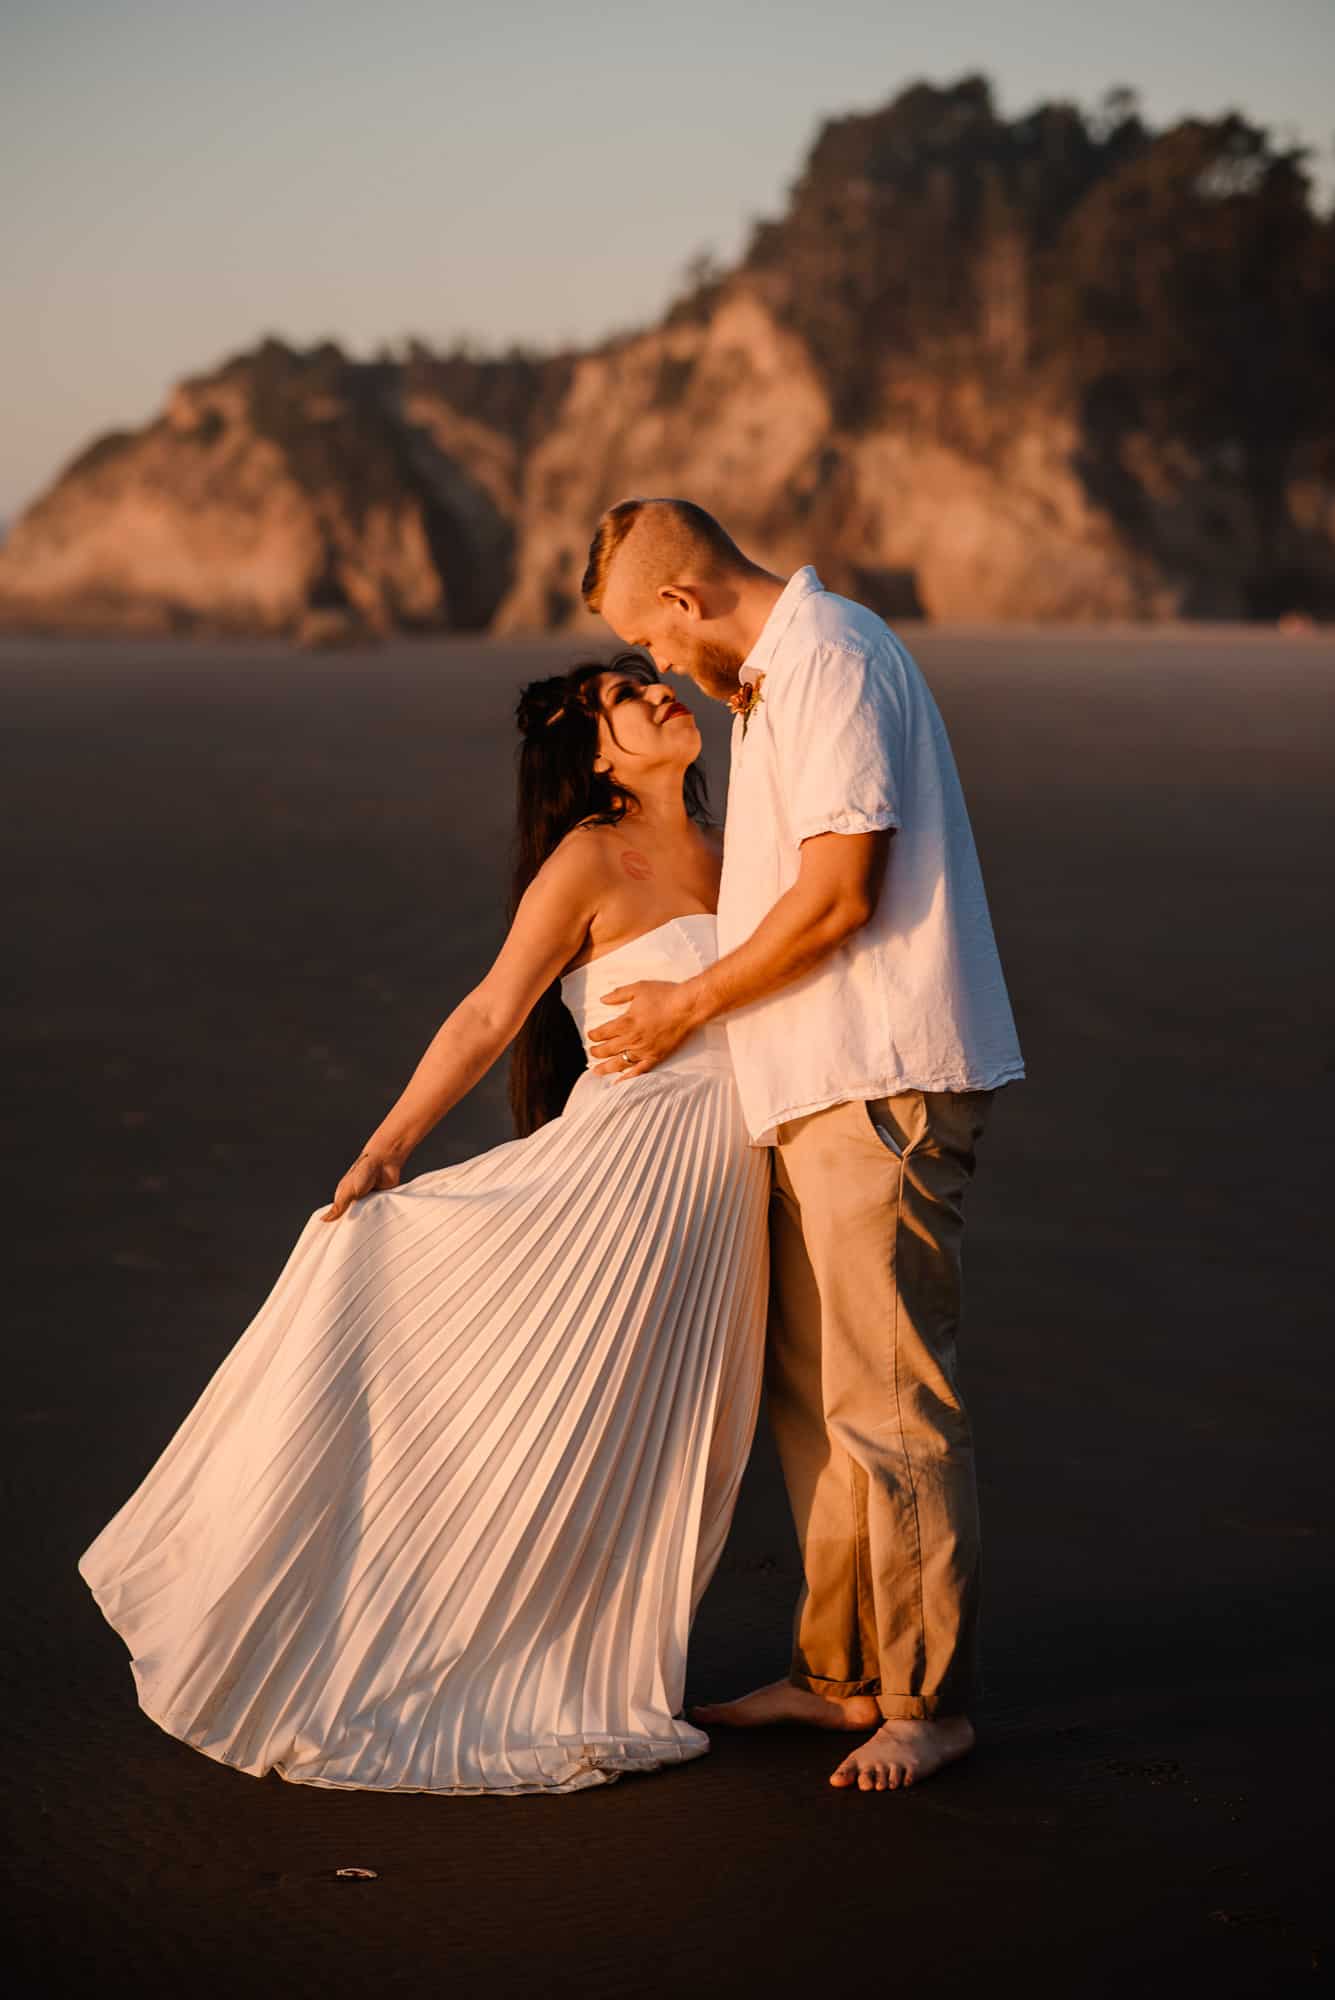 elopement wedding standing in front of the setting sun on the oregon coast after following this elopement wedding day schedule guide